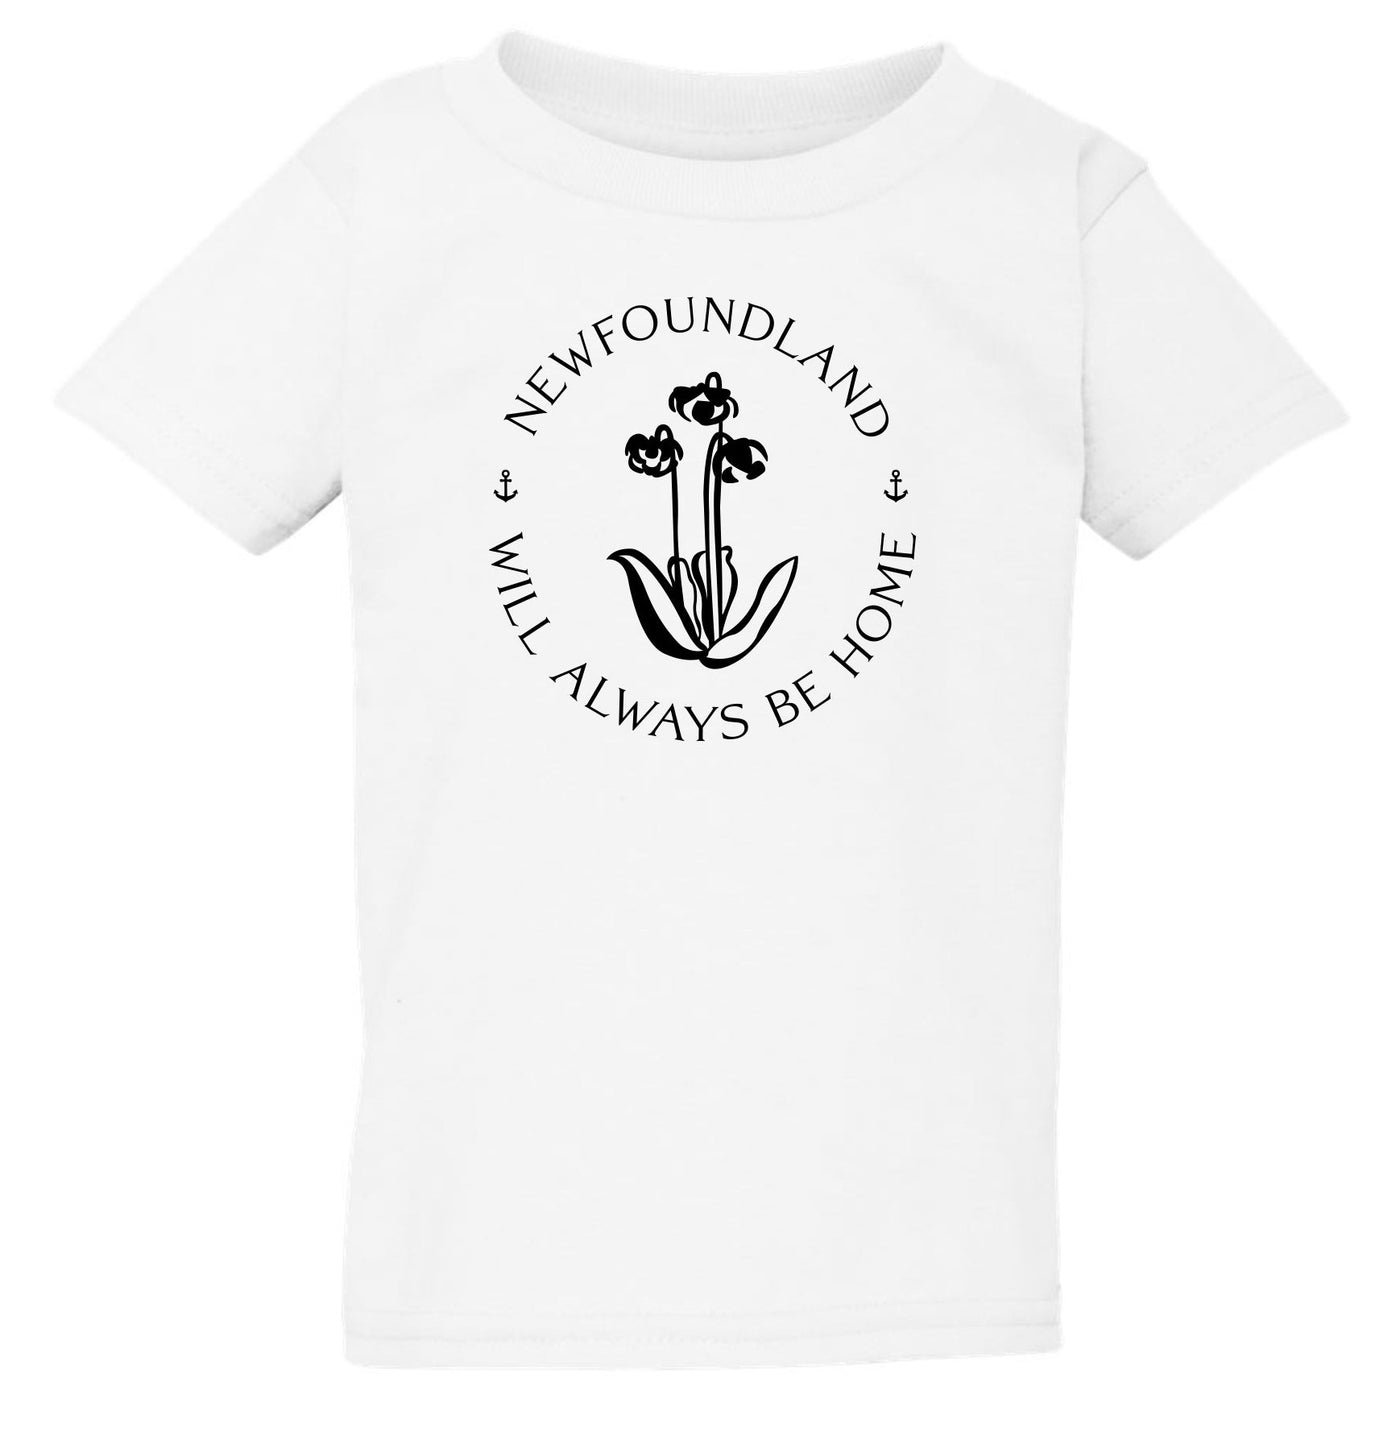 "Newfoundland Will Always Be Home" Toddler/Youth T-Shirt